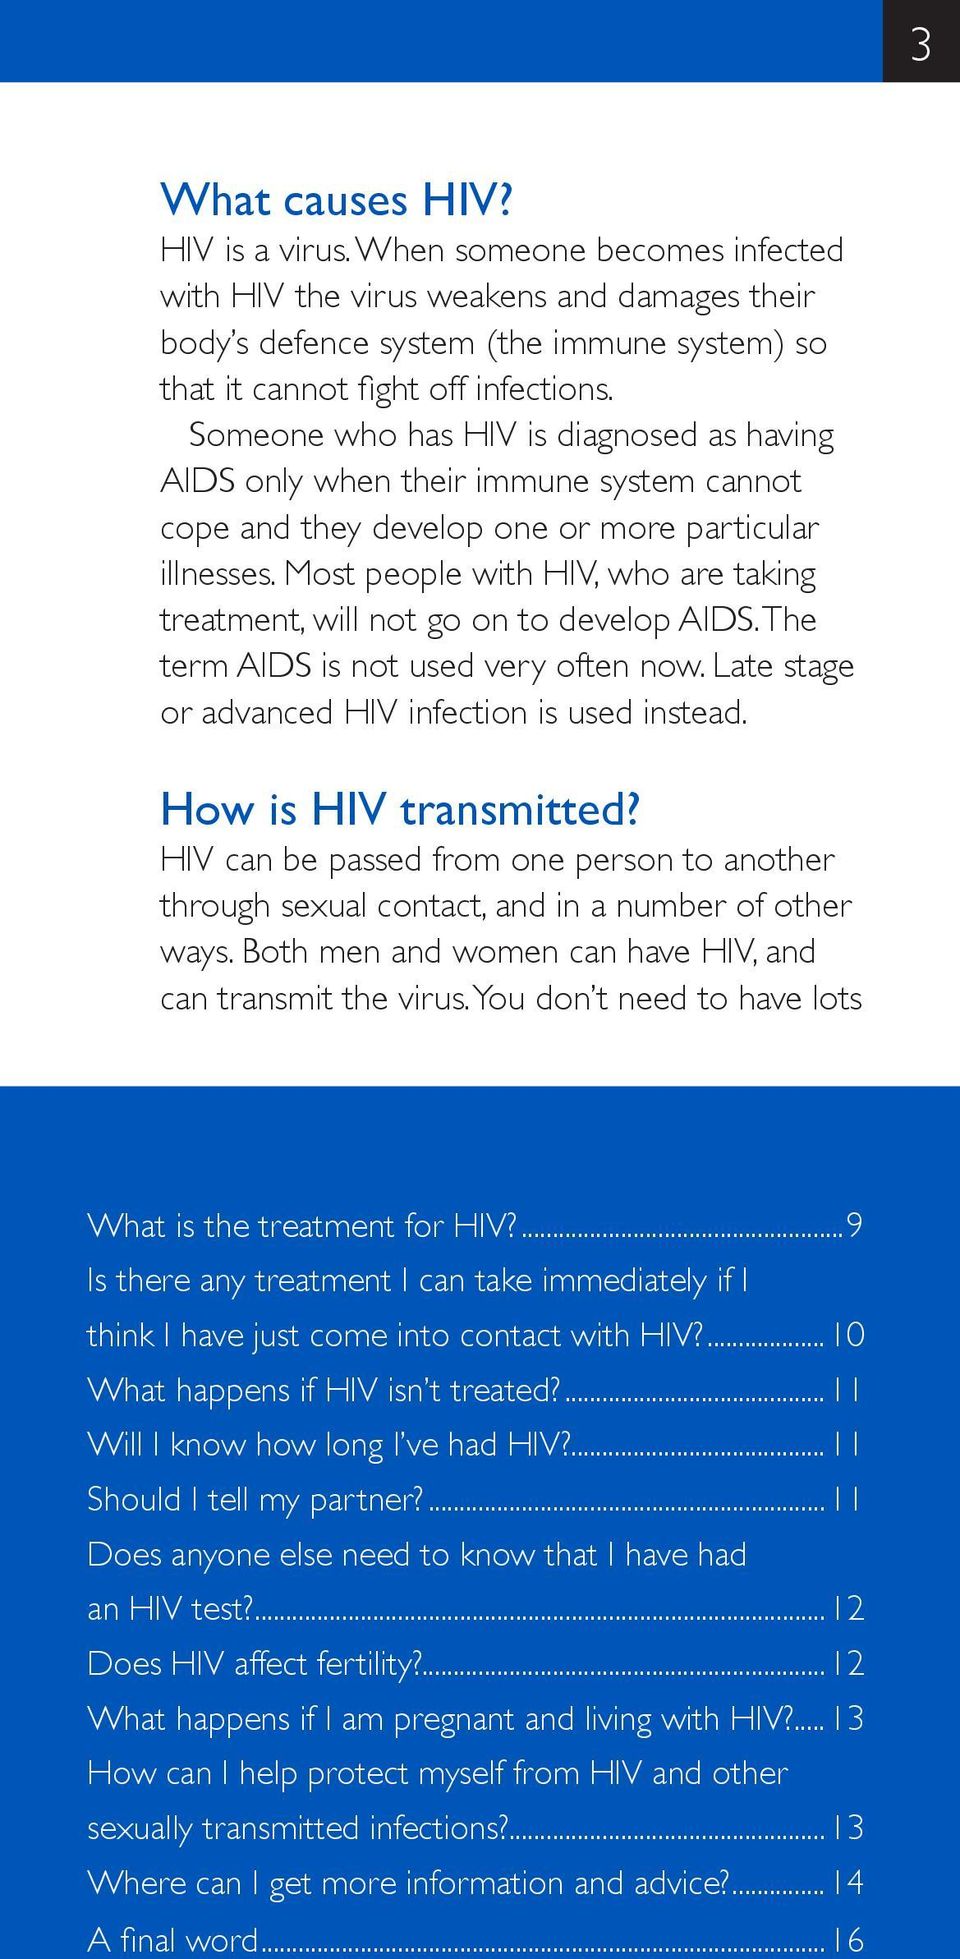 Most people with HIV, who are taking treatment, will not go on to develop AIDS. The term AIDS is not used very often now. Late stage or advanced HIV infection is used instead. How is HIV transmitted?